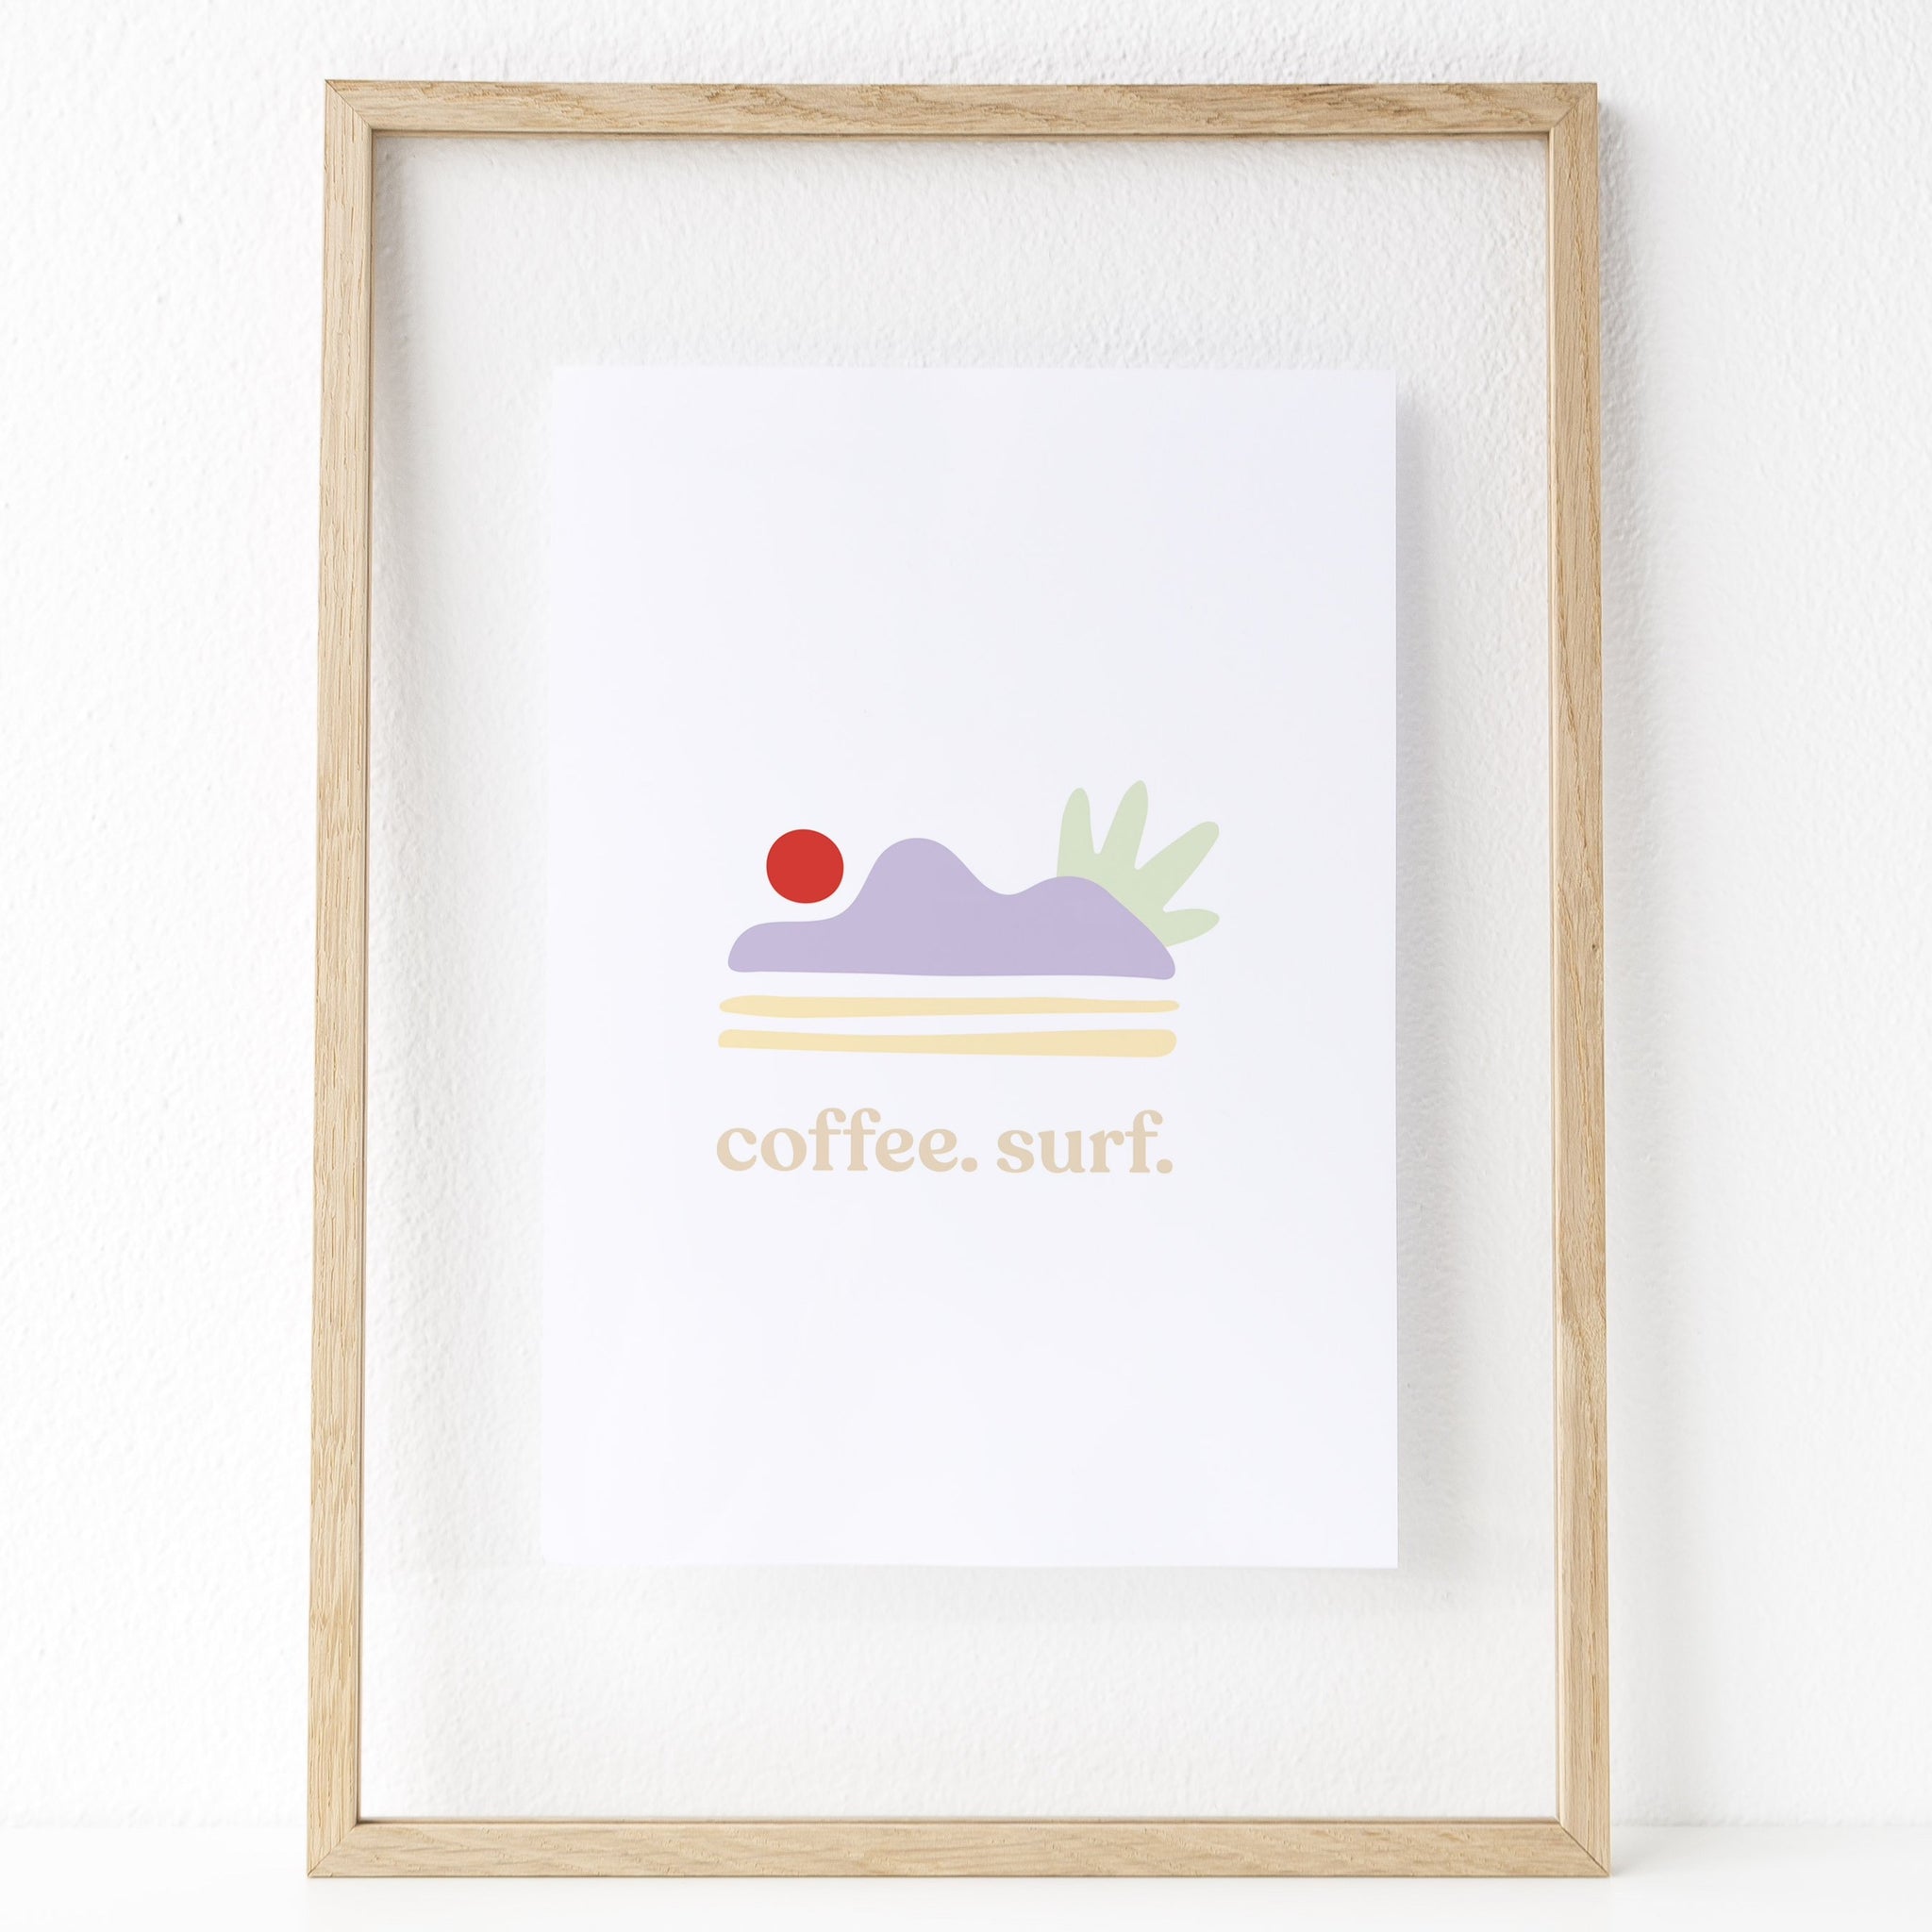 Coffee. Surf. Print. The print features some abstract shapes that resemble a sun setting over some hills. Hues of lilac, red, light green, and yellow can be seen in this print. 